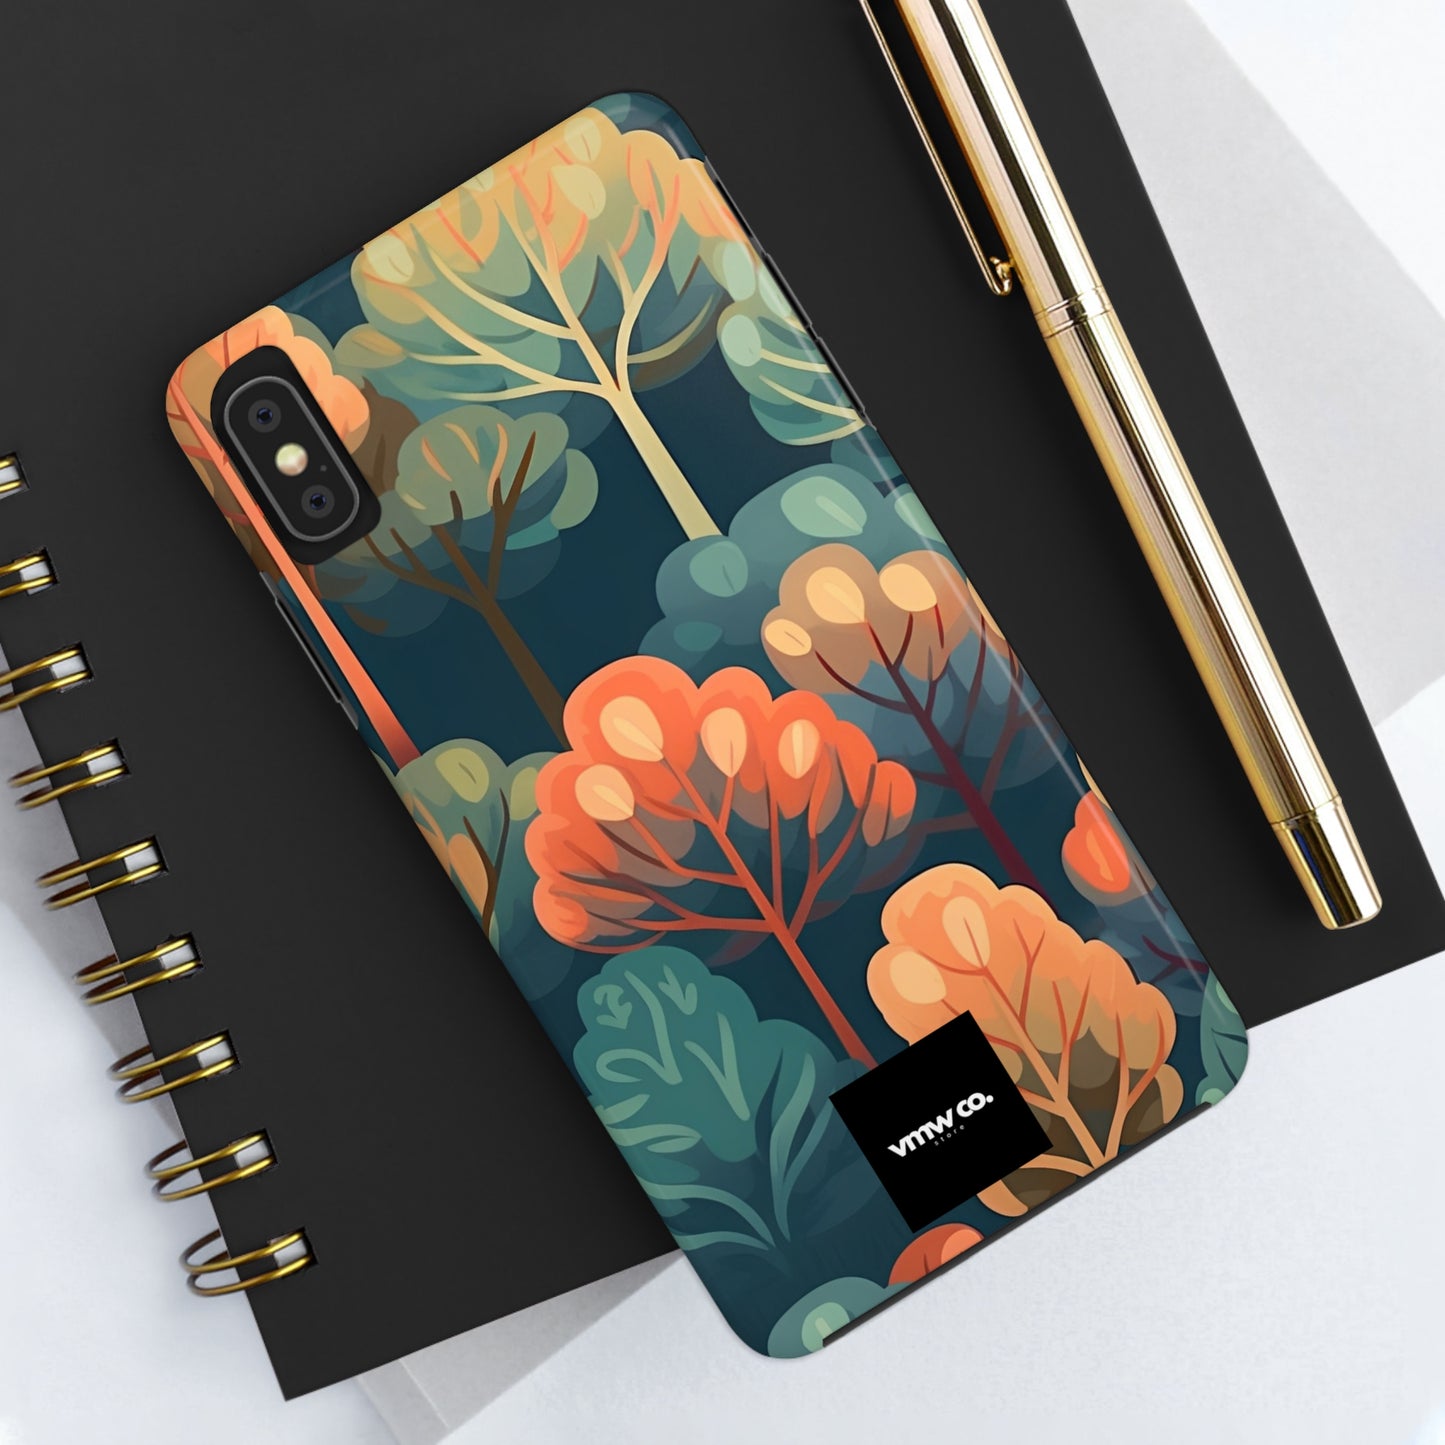 Fall Forest iPhone Tough Phone Cases